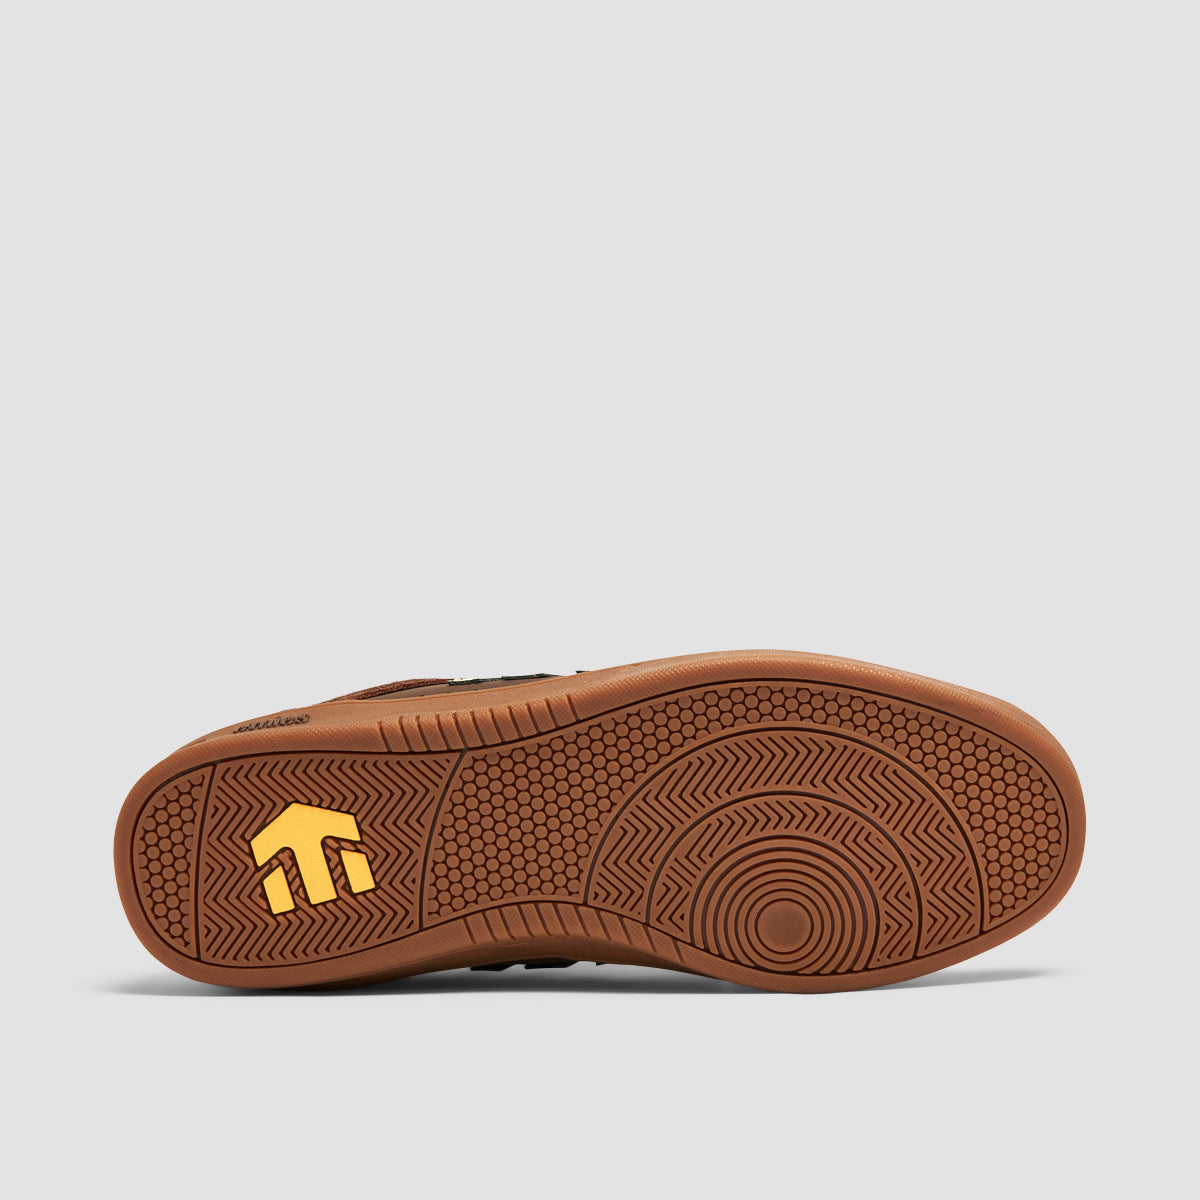 Etnies Windrow Shoes - Brown/Gum